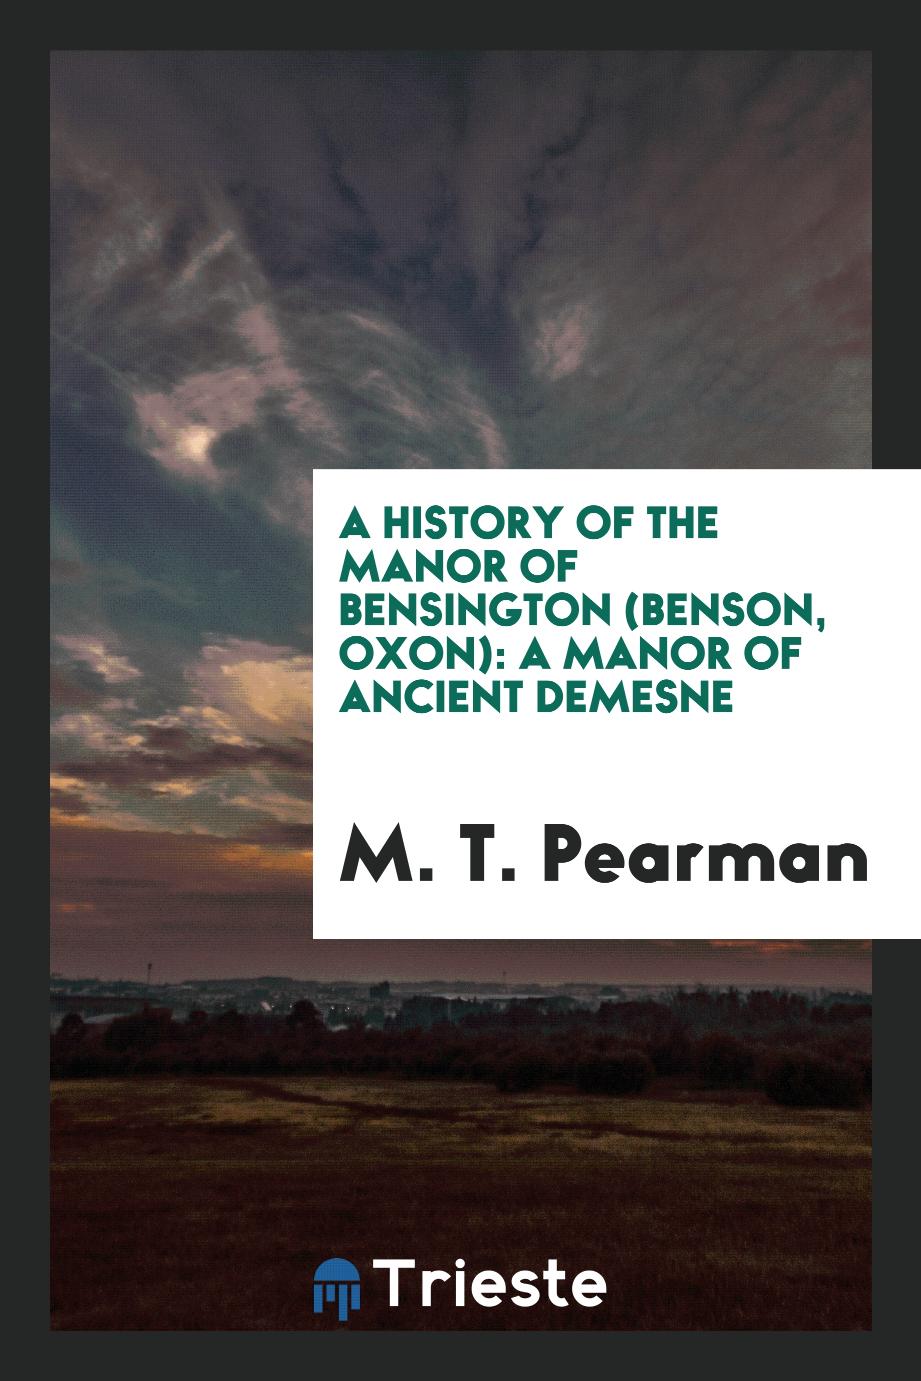 A History of the Manor of Bensington (Benson, Oxon): A Manor of Ancient Demesne